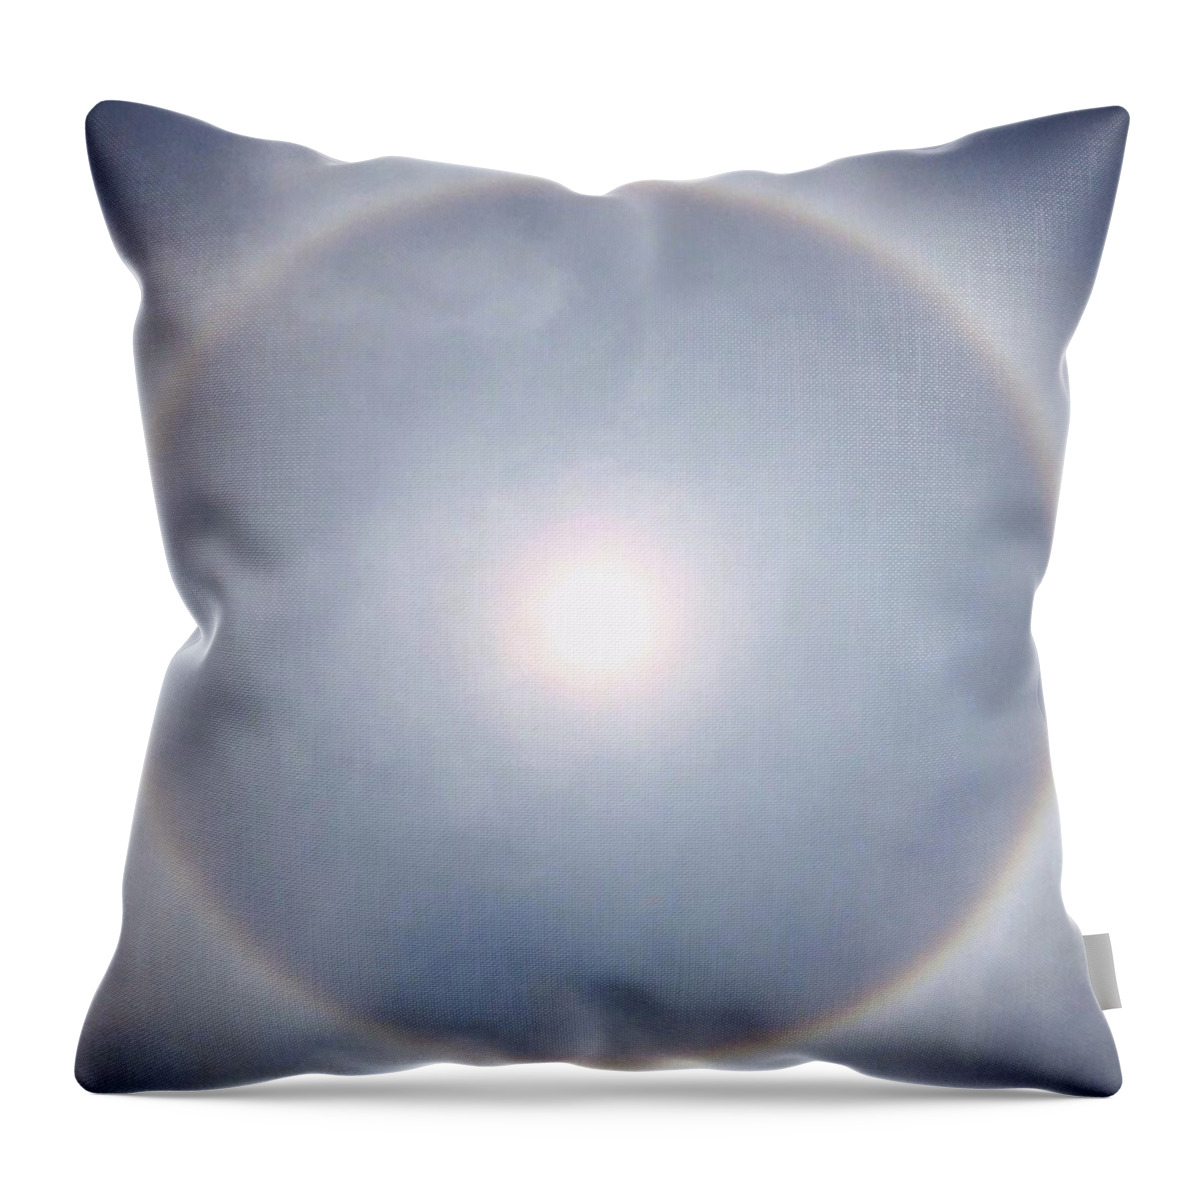 Sun Throw Pillow featuring the photograph We Are All Children Of The Sun by Carlos Chavez